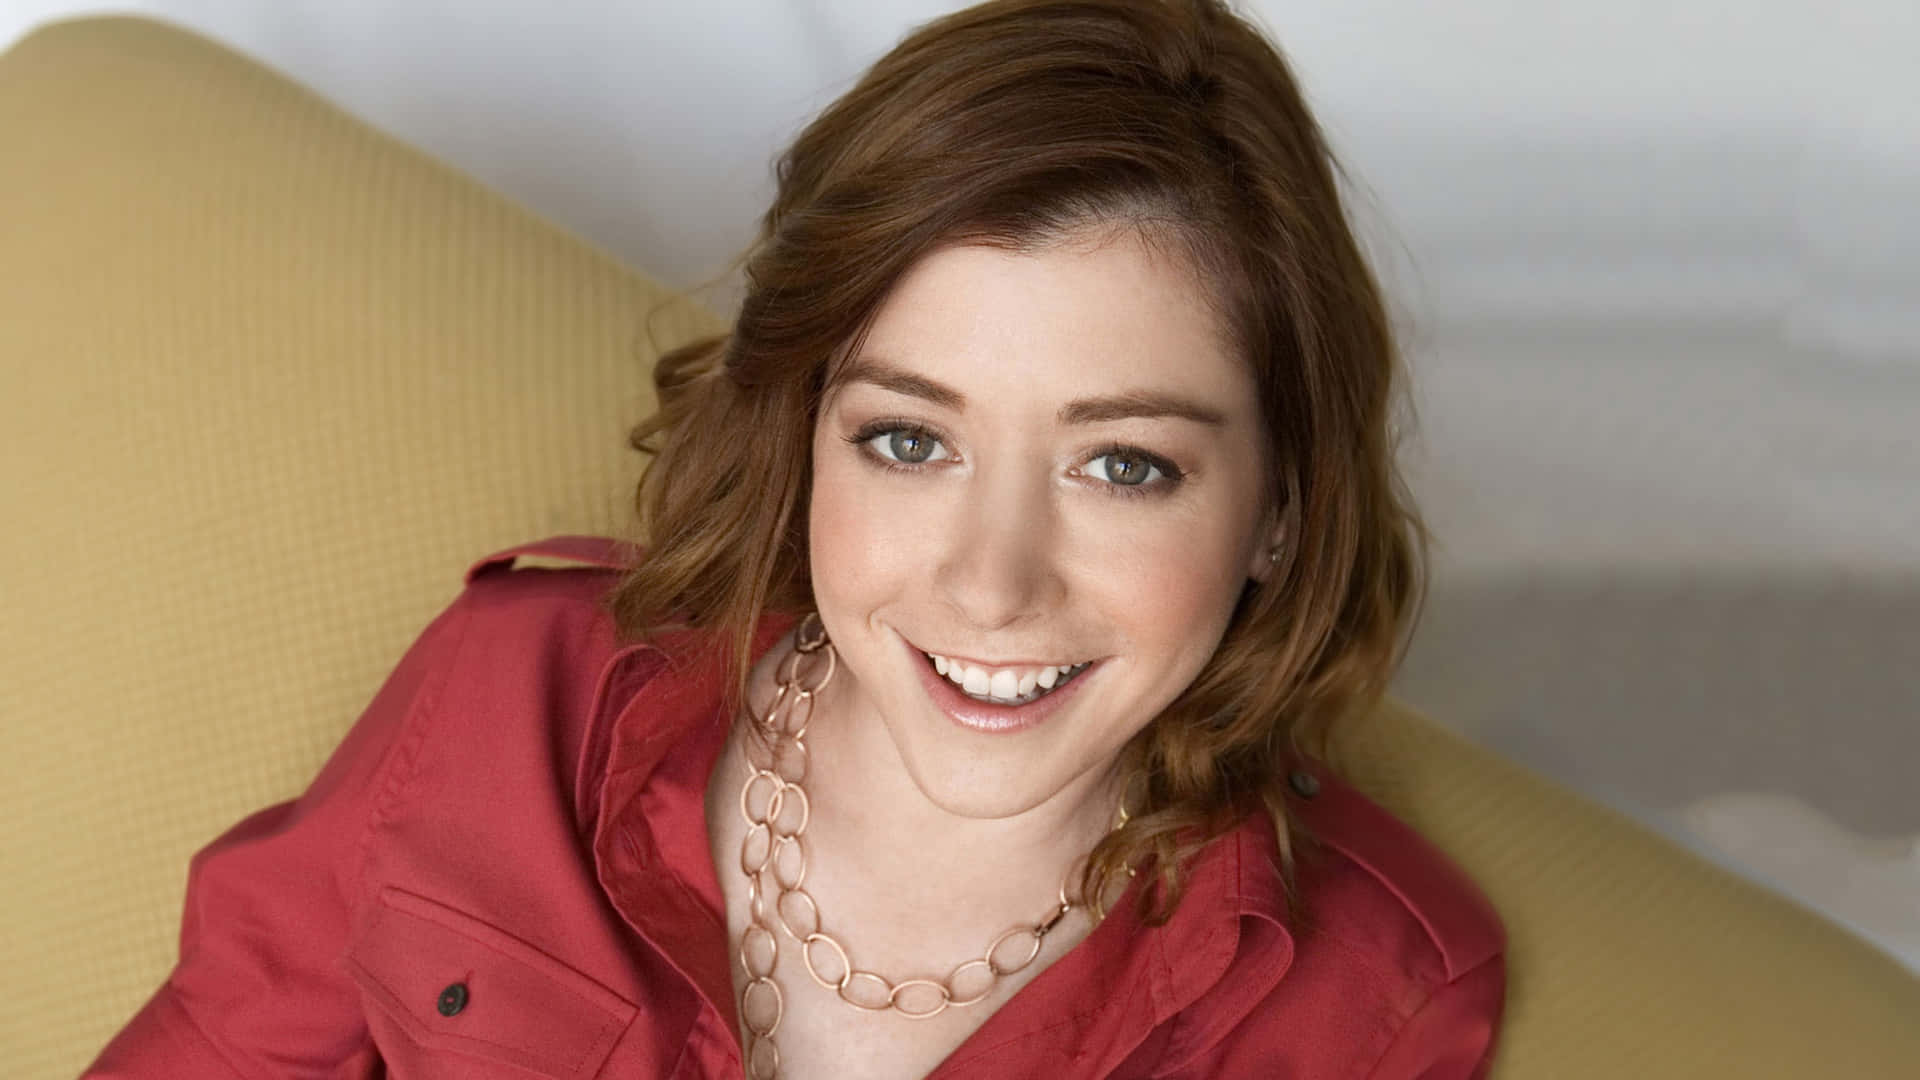 Alyson Hannigan Smiling Beautifully on a Red Carpet Event Wallpaper